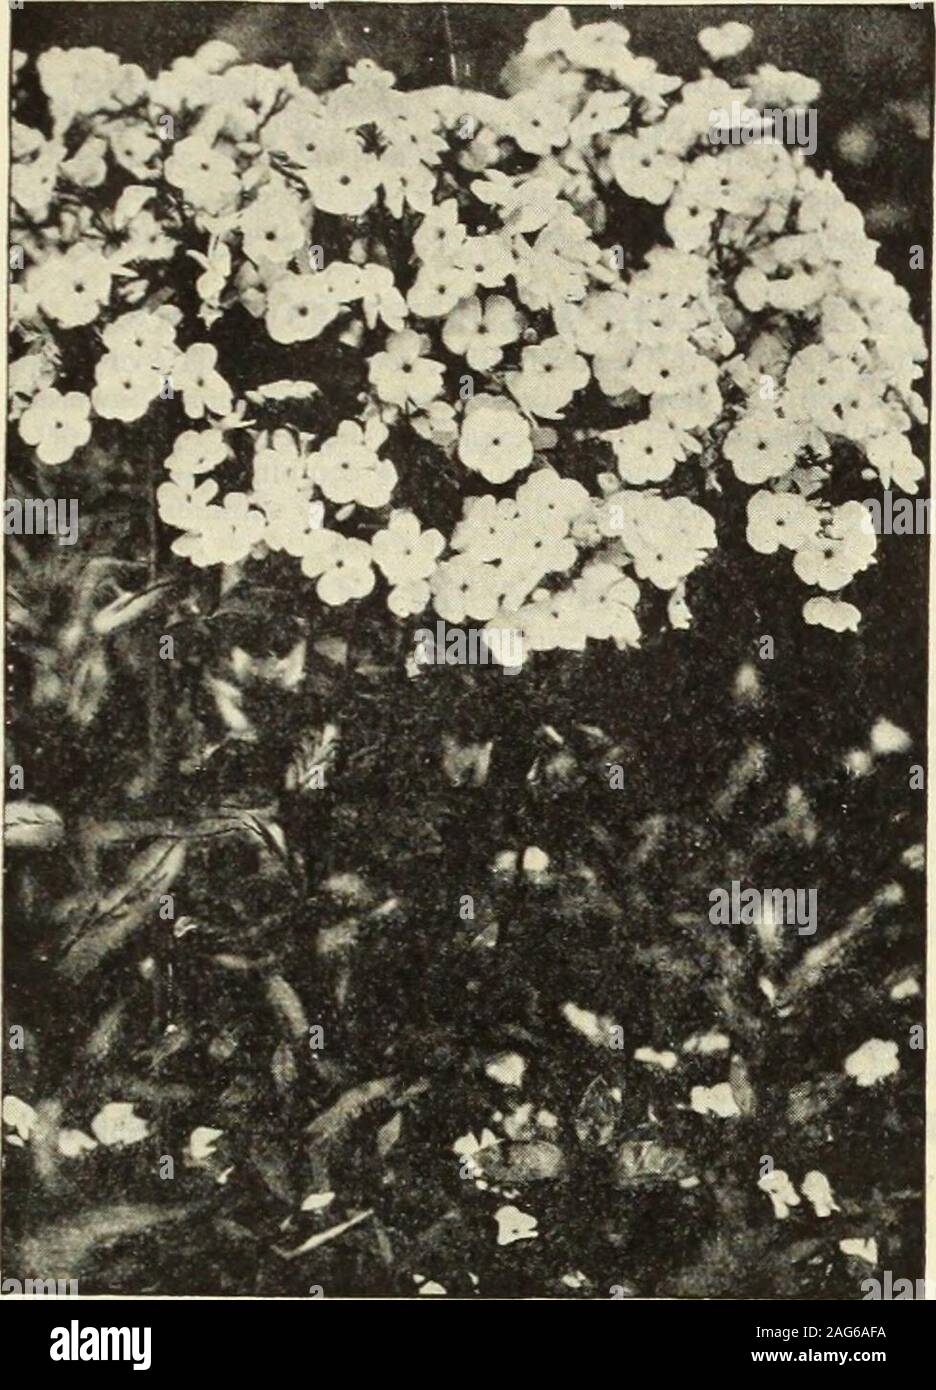 . Dreer's 1913 garden book. 201. New Hardy Phlox Afendsi. A NEW RACE OF HARDY PHLOXES. (Phlox Arendsi.) At the great International Exhibition held in London, May, 1912,where this new type of Phlox received an Award of Merit no othernew plant in the Hardy Perennial class attracted such great attention.It originated through the successful crossing of the early-floweringpopular Phlox Divaricata Canadensis with the showy hardy herba-ceous varieties of Phlox Decussata. The plants are of vigorous, branch-ing habit, growing, according to the variety, from 12 to 24 incheshigh. Coming into flower durin Stock Photo